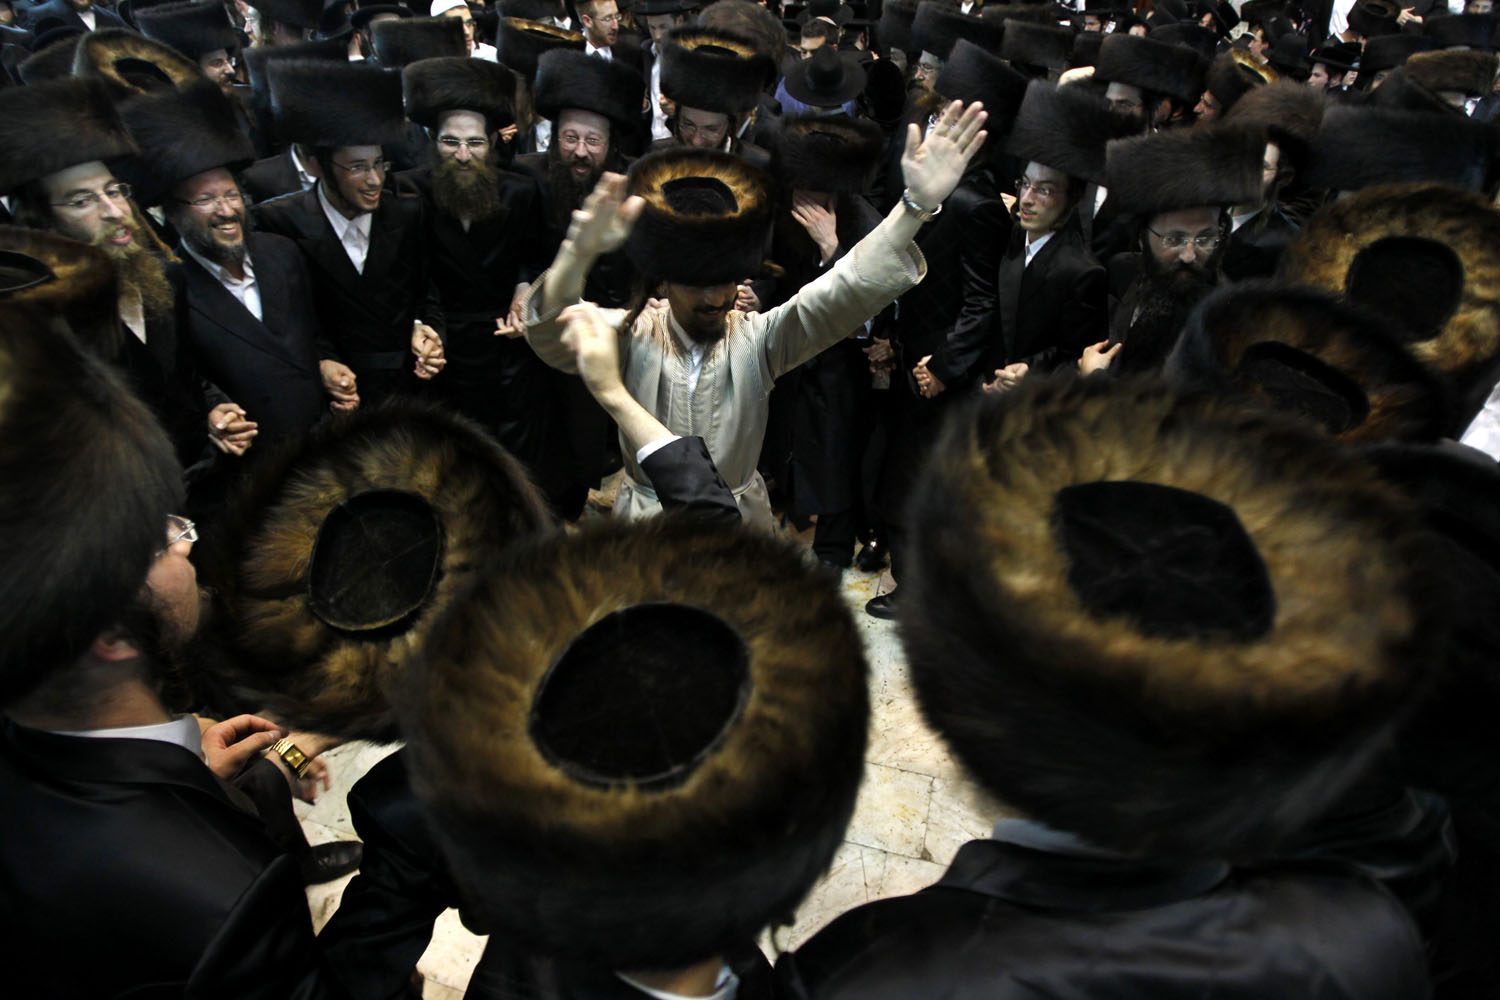 Oct. 8, 2012. Ultra-Orthodox Jewish men dance during Simhat Torah celebrations in Jerusalem's Mea Shearim neighborhood. The worshipers are marking the end of the annual cycle of the reading of the Torah and the beginning of the next cycle.